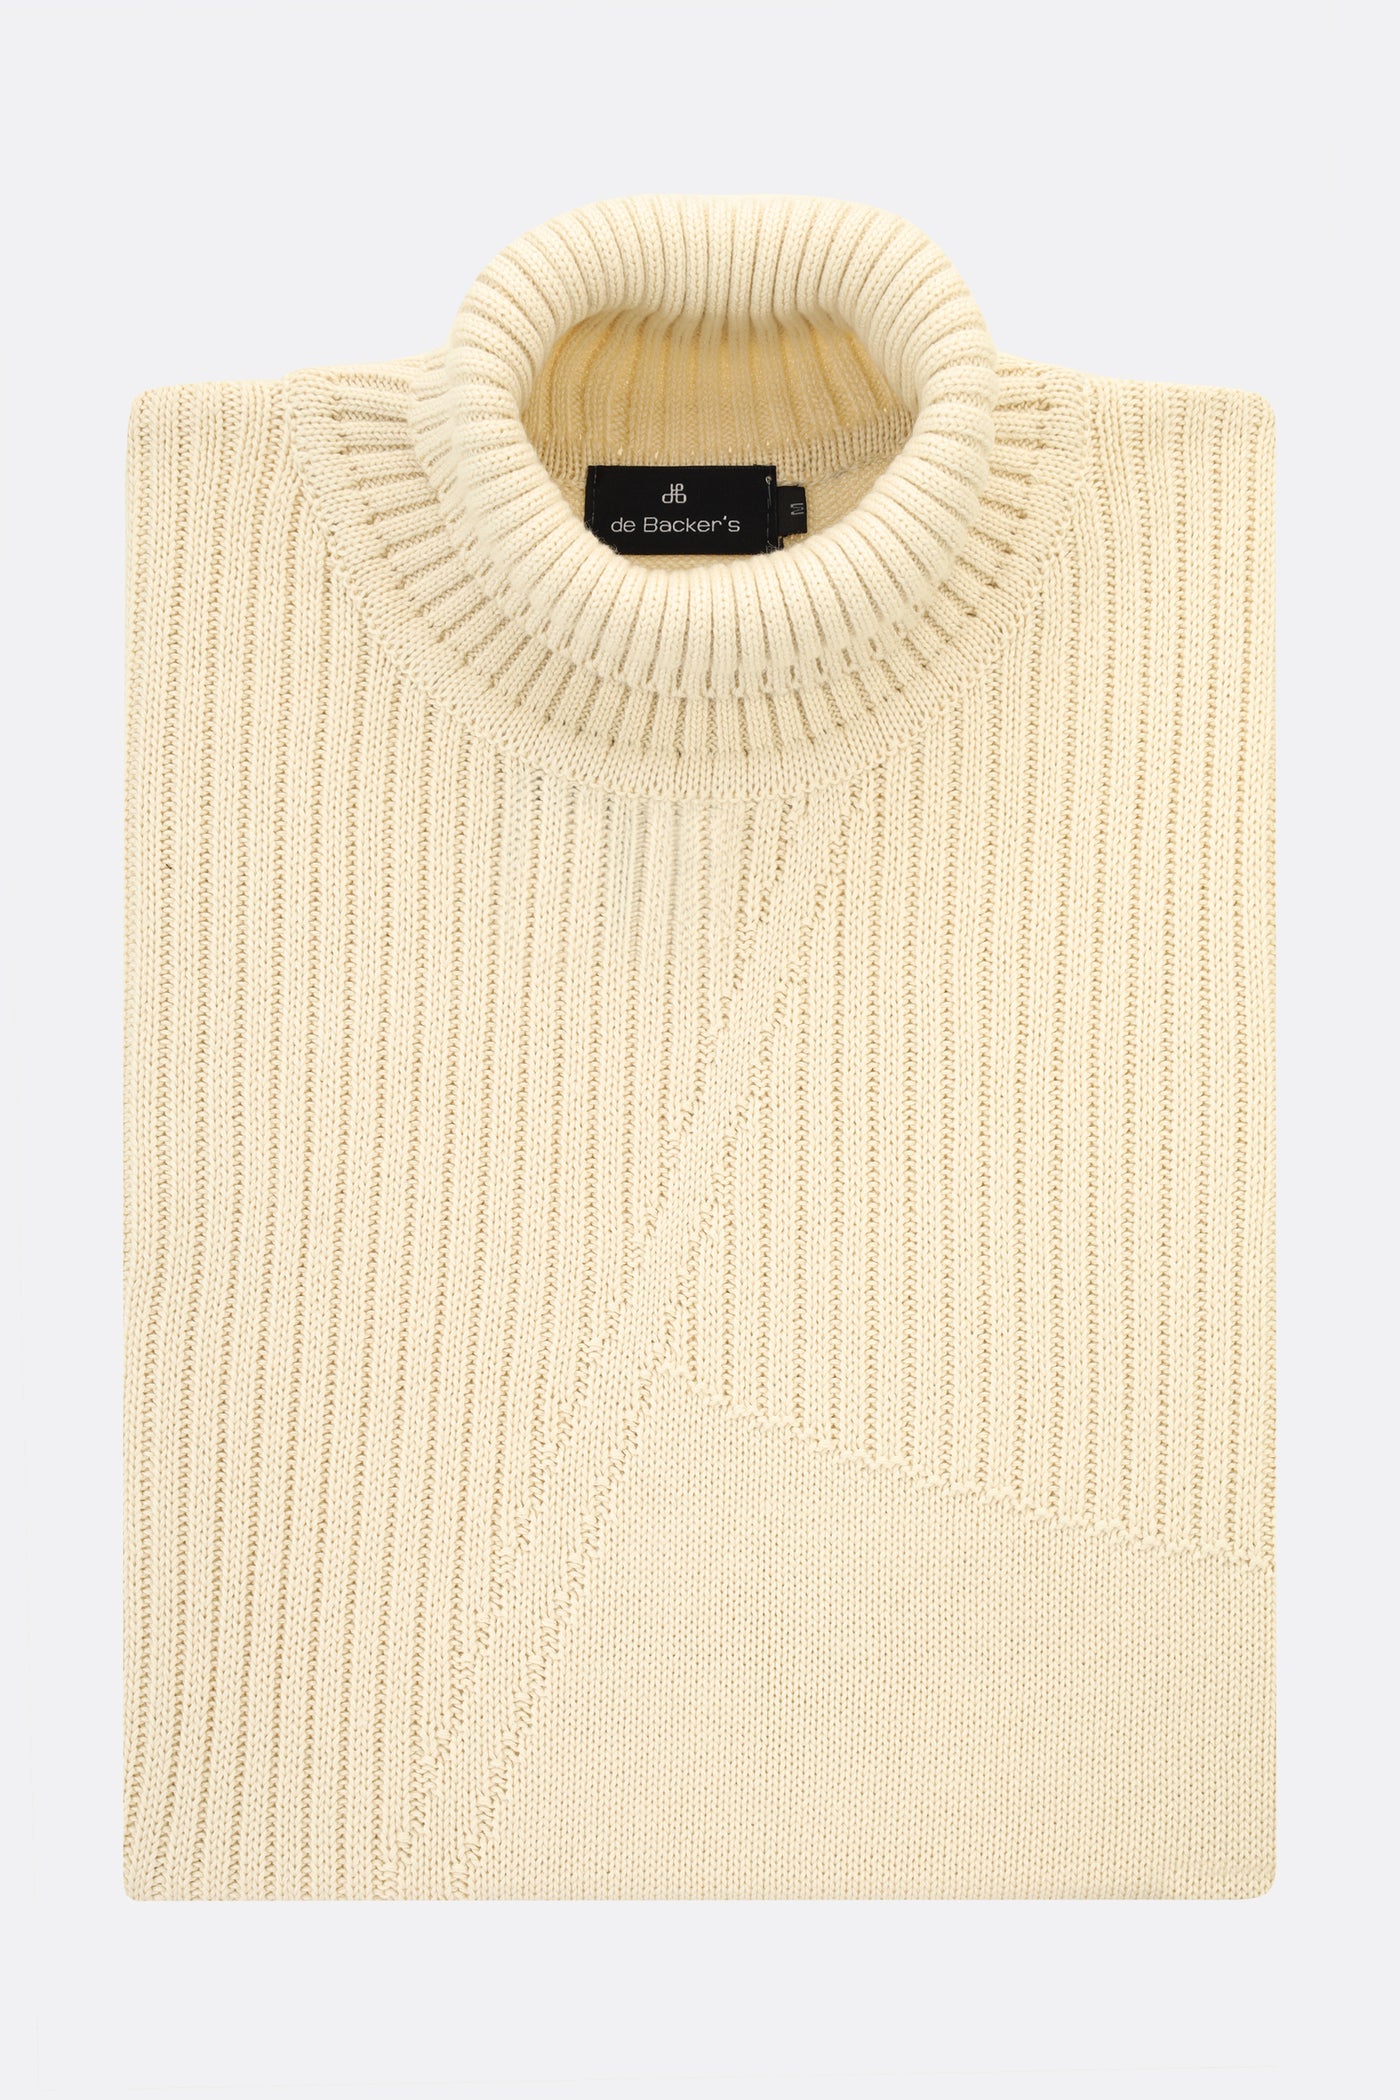 Jacquard Knitted High-neck Off White Pullover